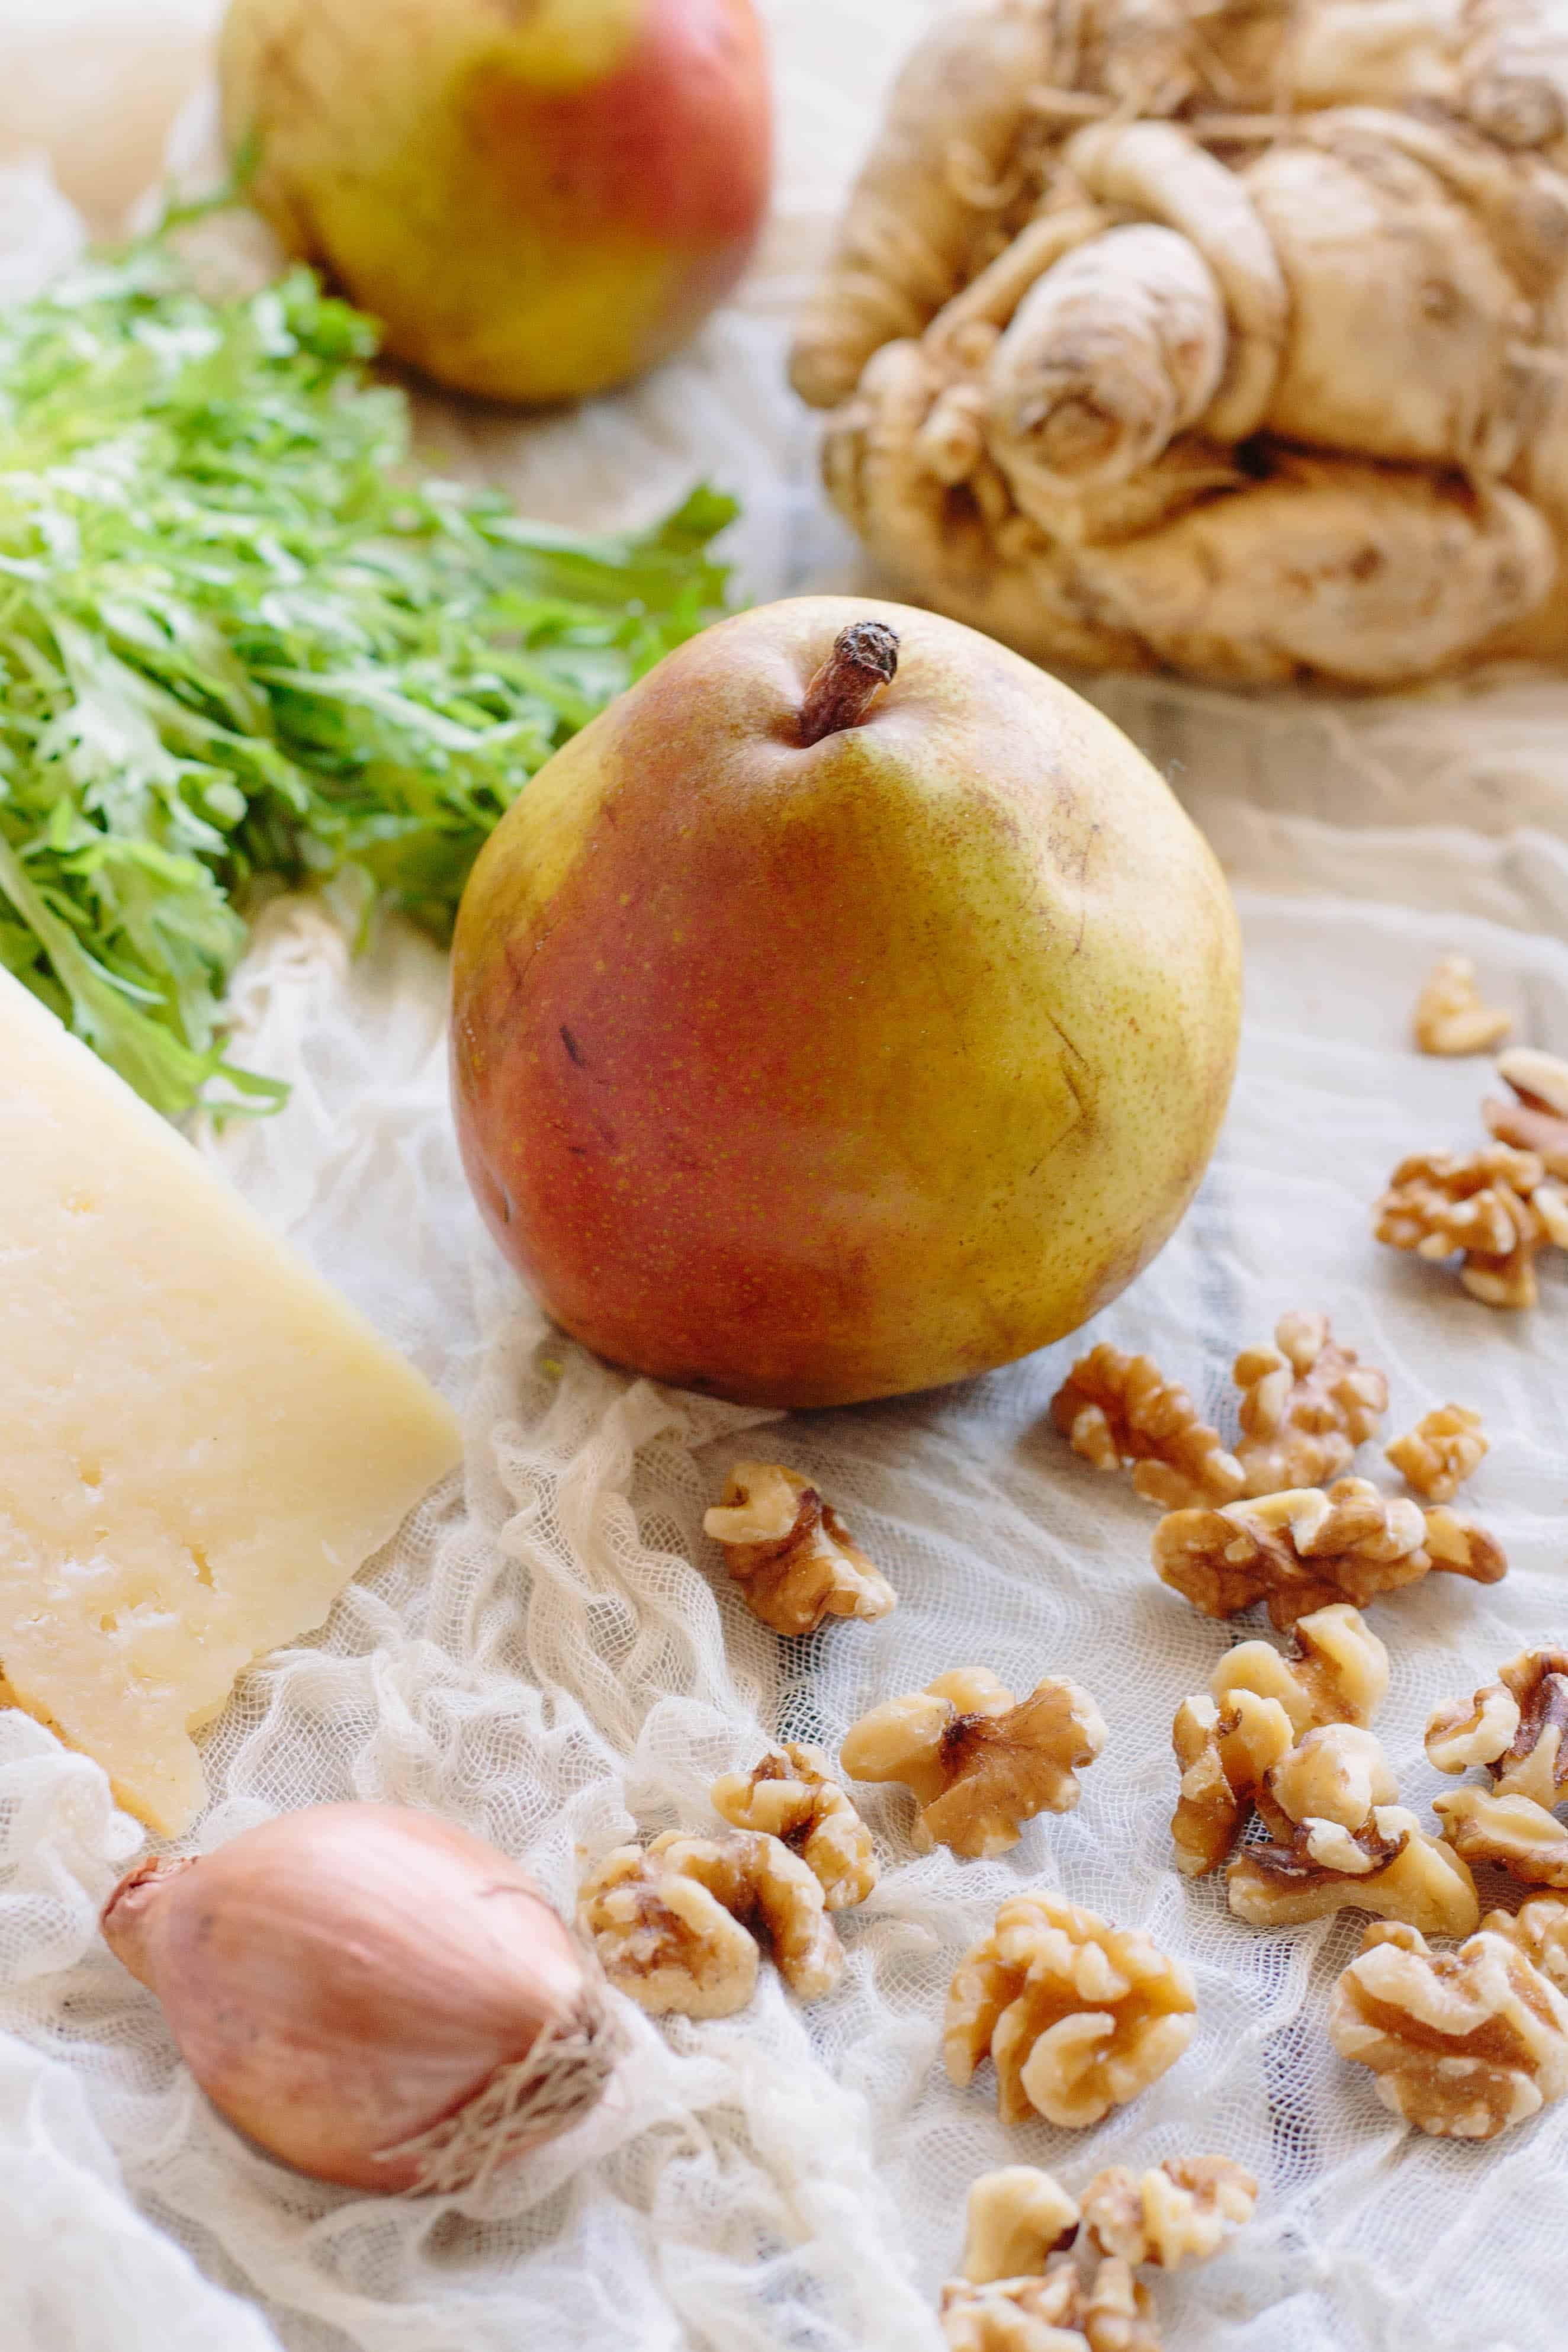 Celery Root + Pear Salad with Walnuts + Manchego (Video!)